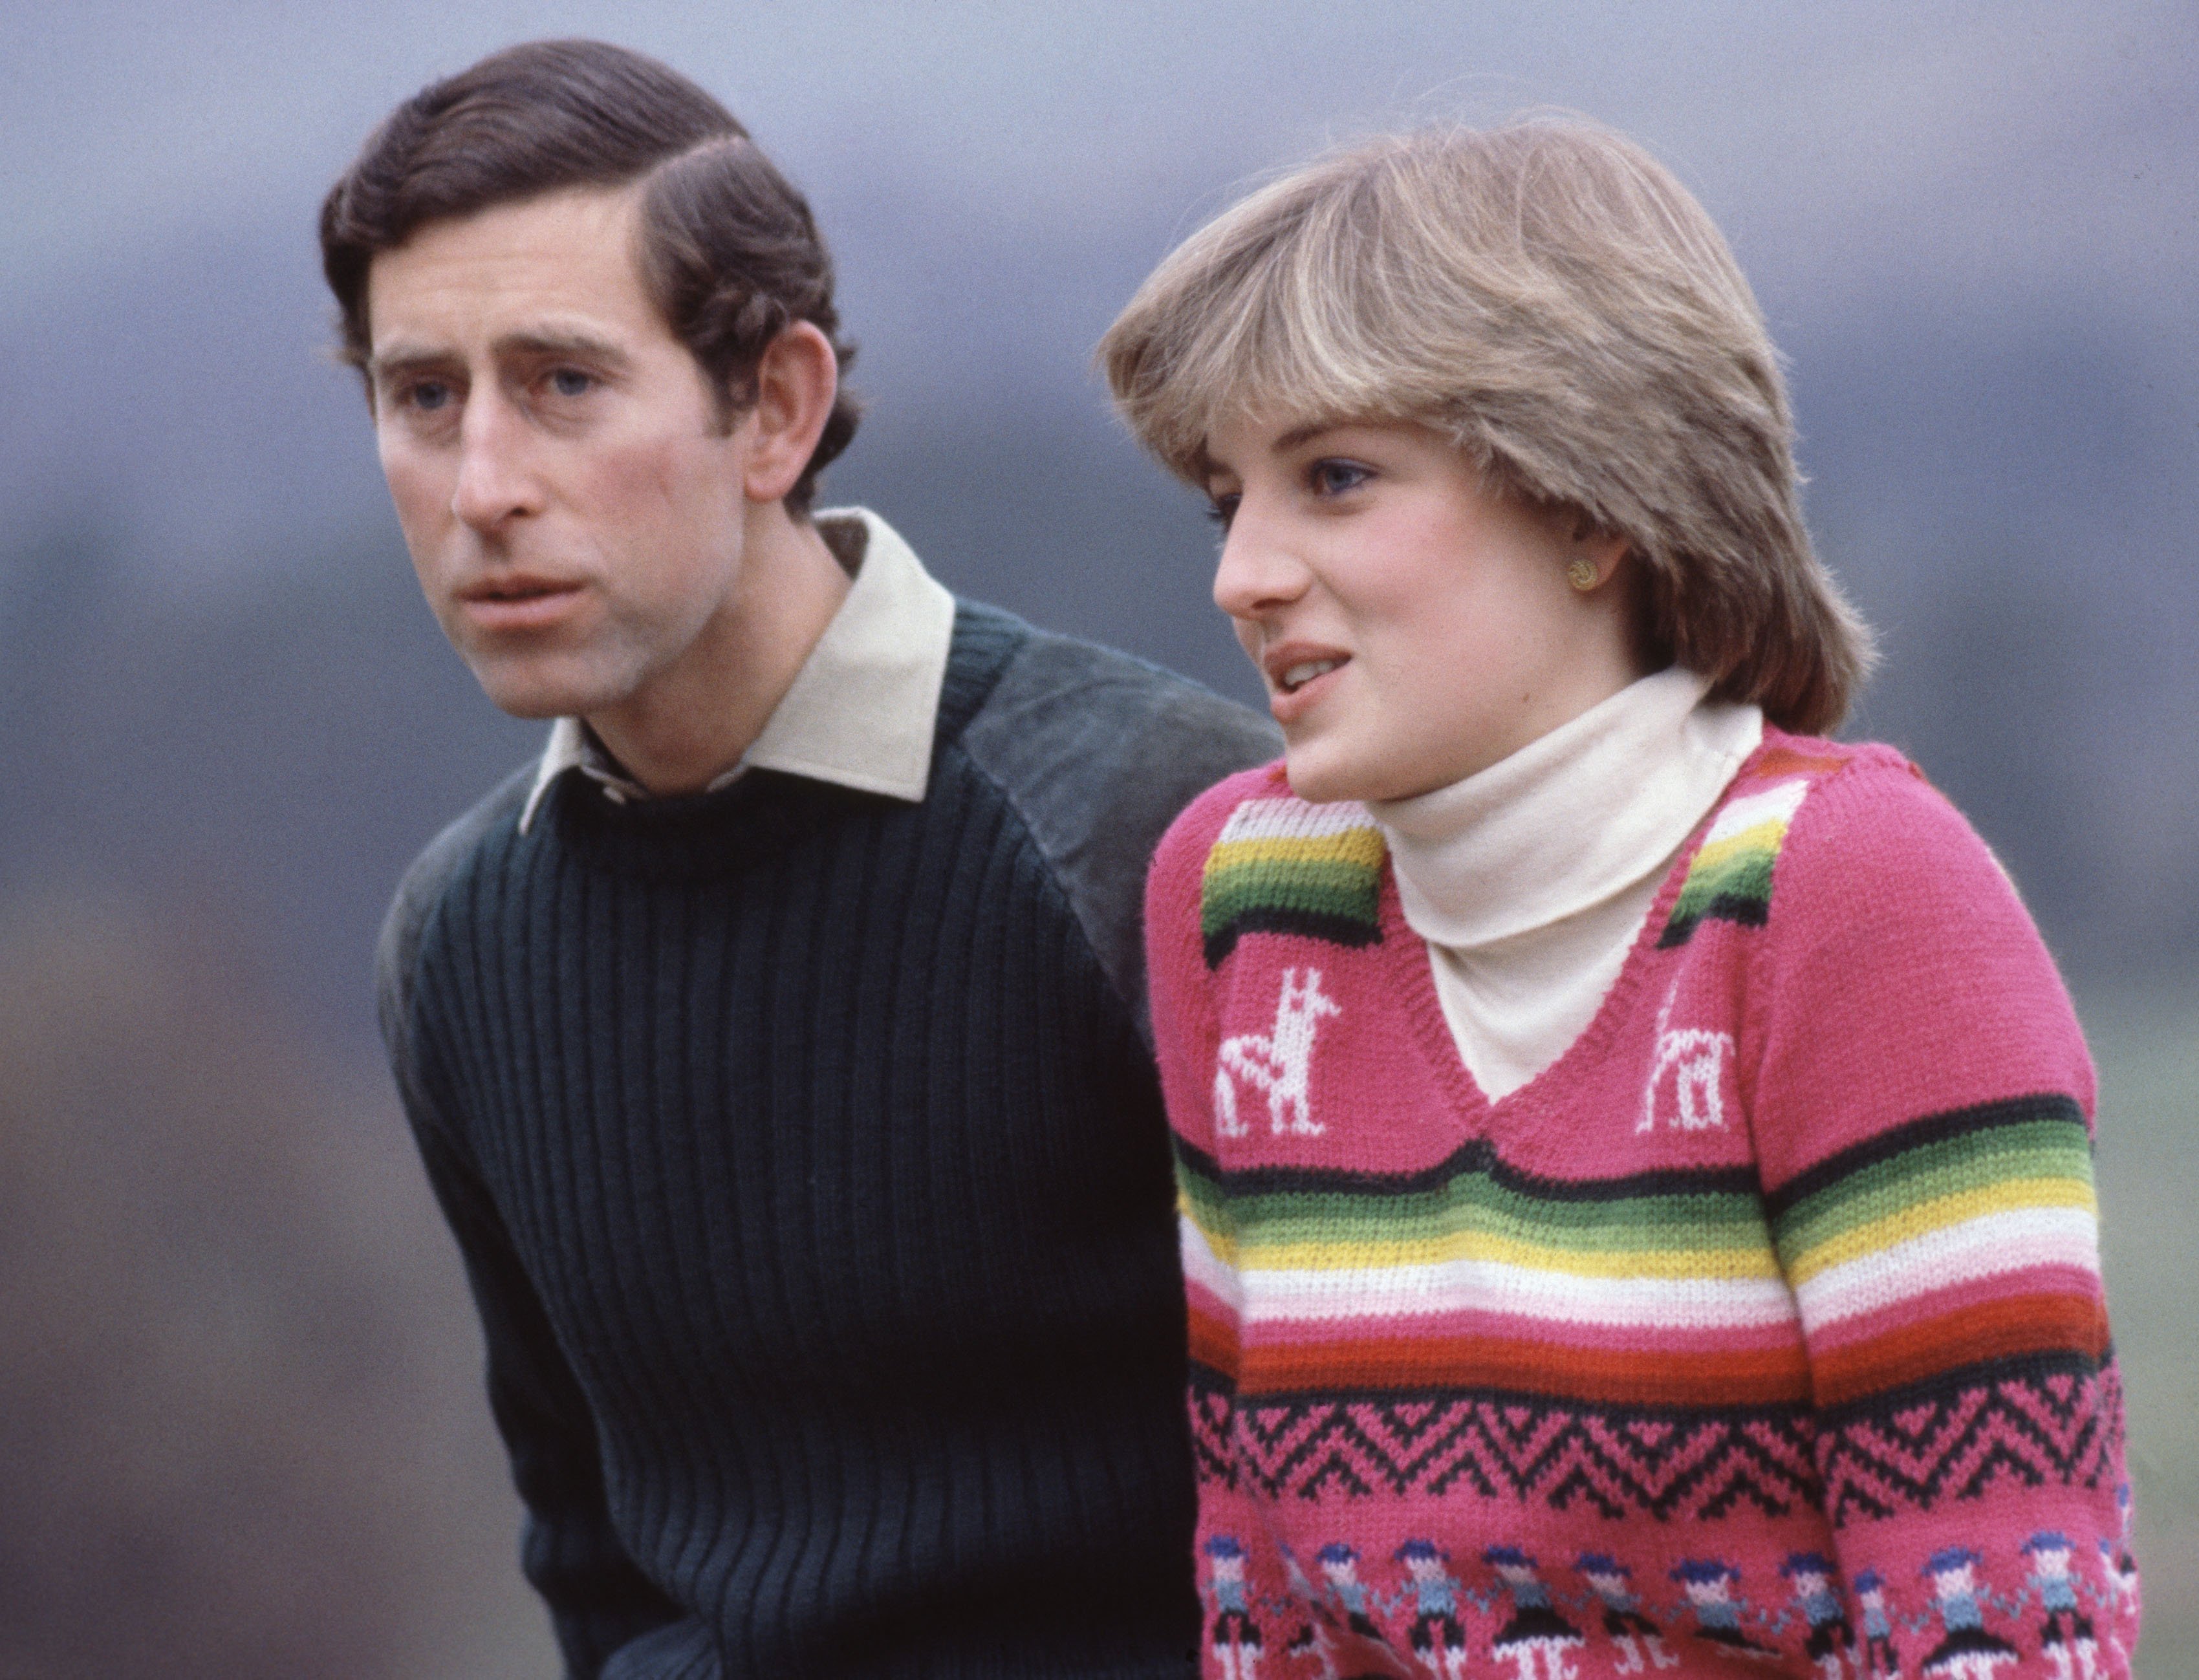 Prince Charles and Lady Diana Spencer at  Craigowan Lodge, Balmoral, Scotland, 6th May 1981 | Source: Getty Images